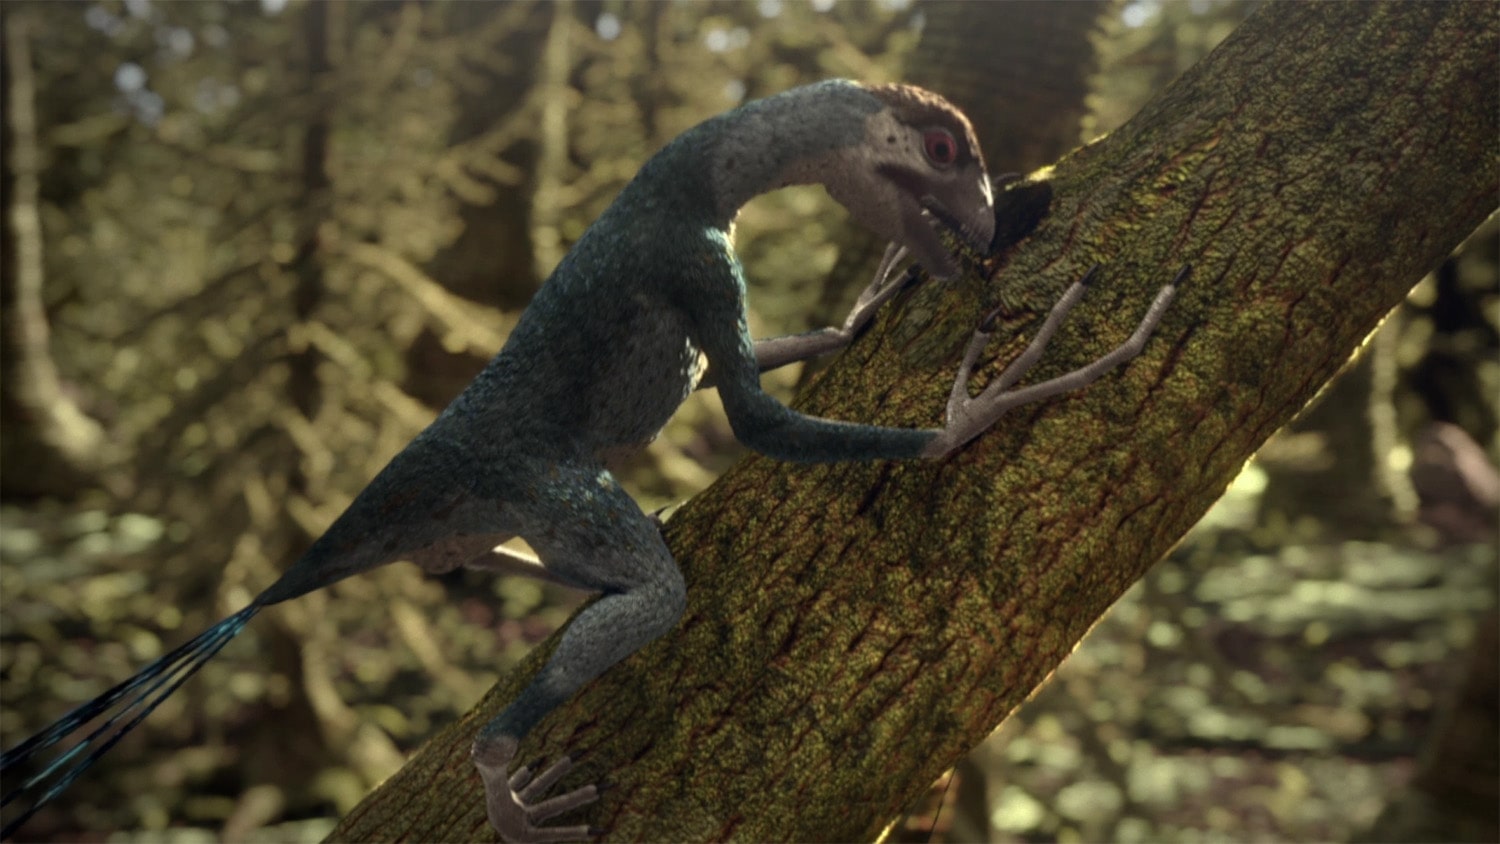 20 interesting facts about Epidexipteryx